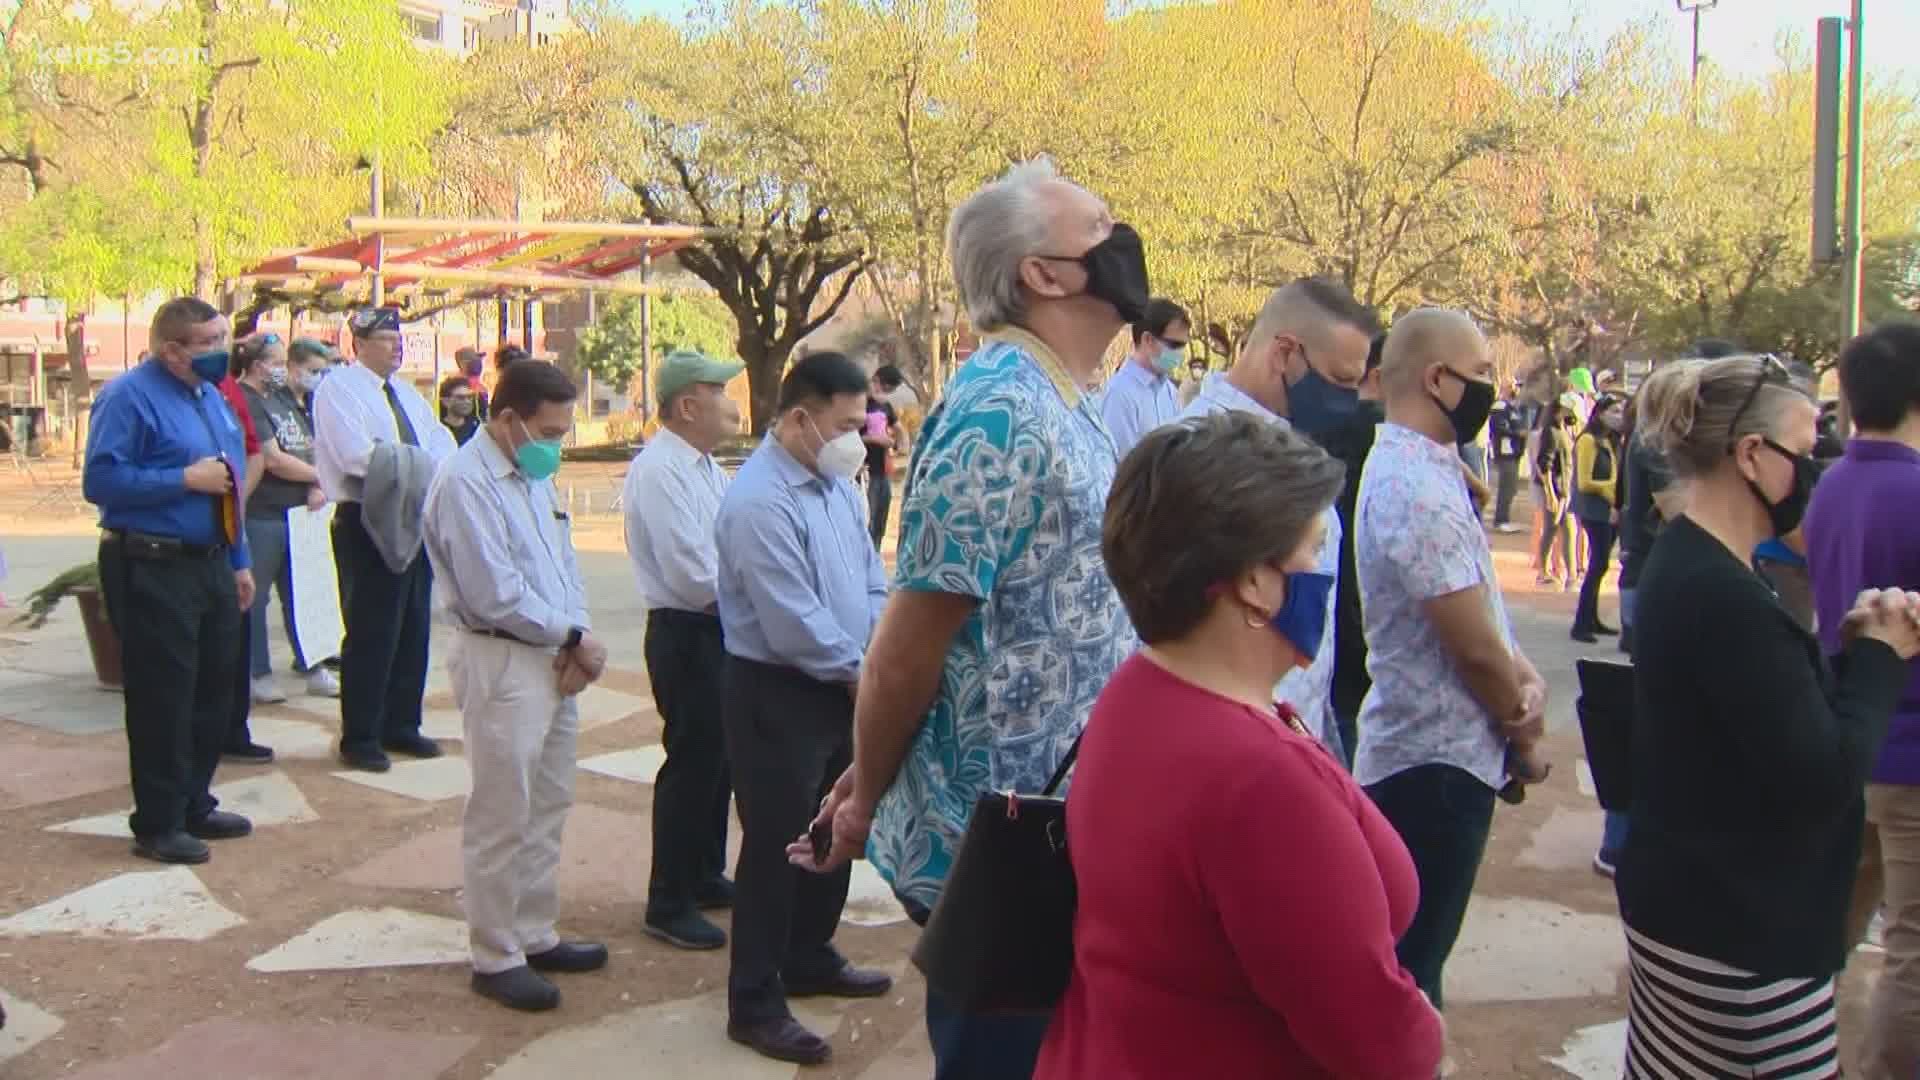 Dozens of people from all backgrounds gathered for the downtown San Antonio rally.